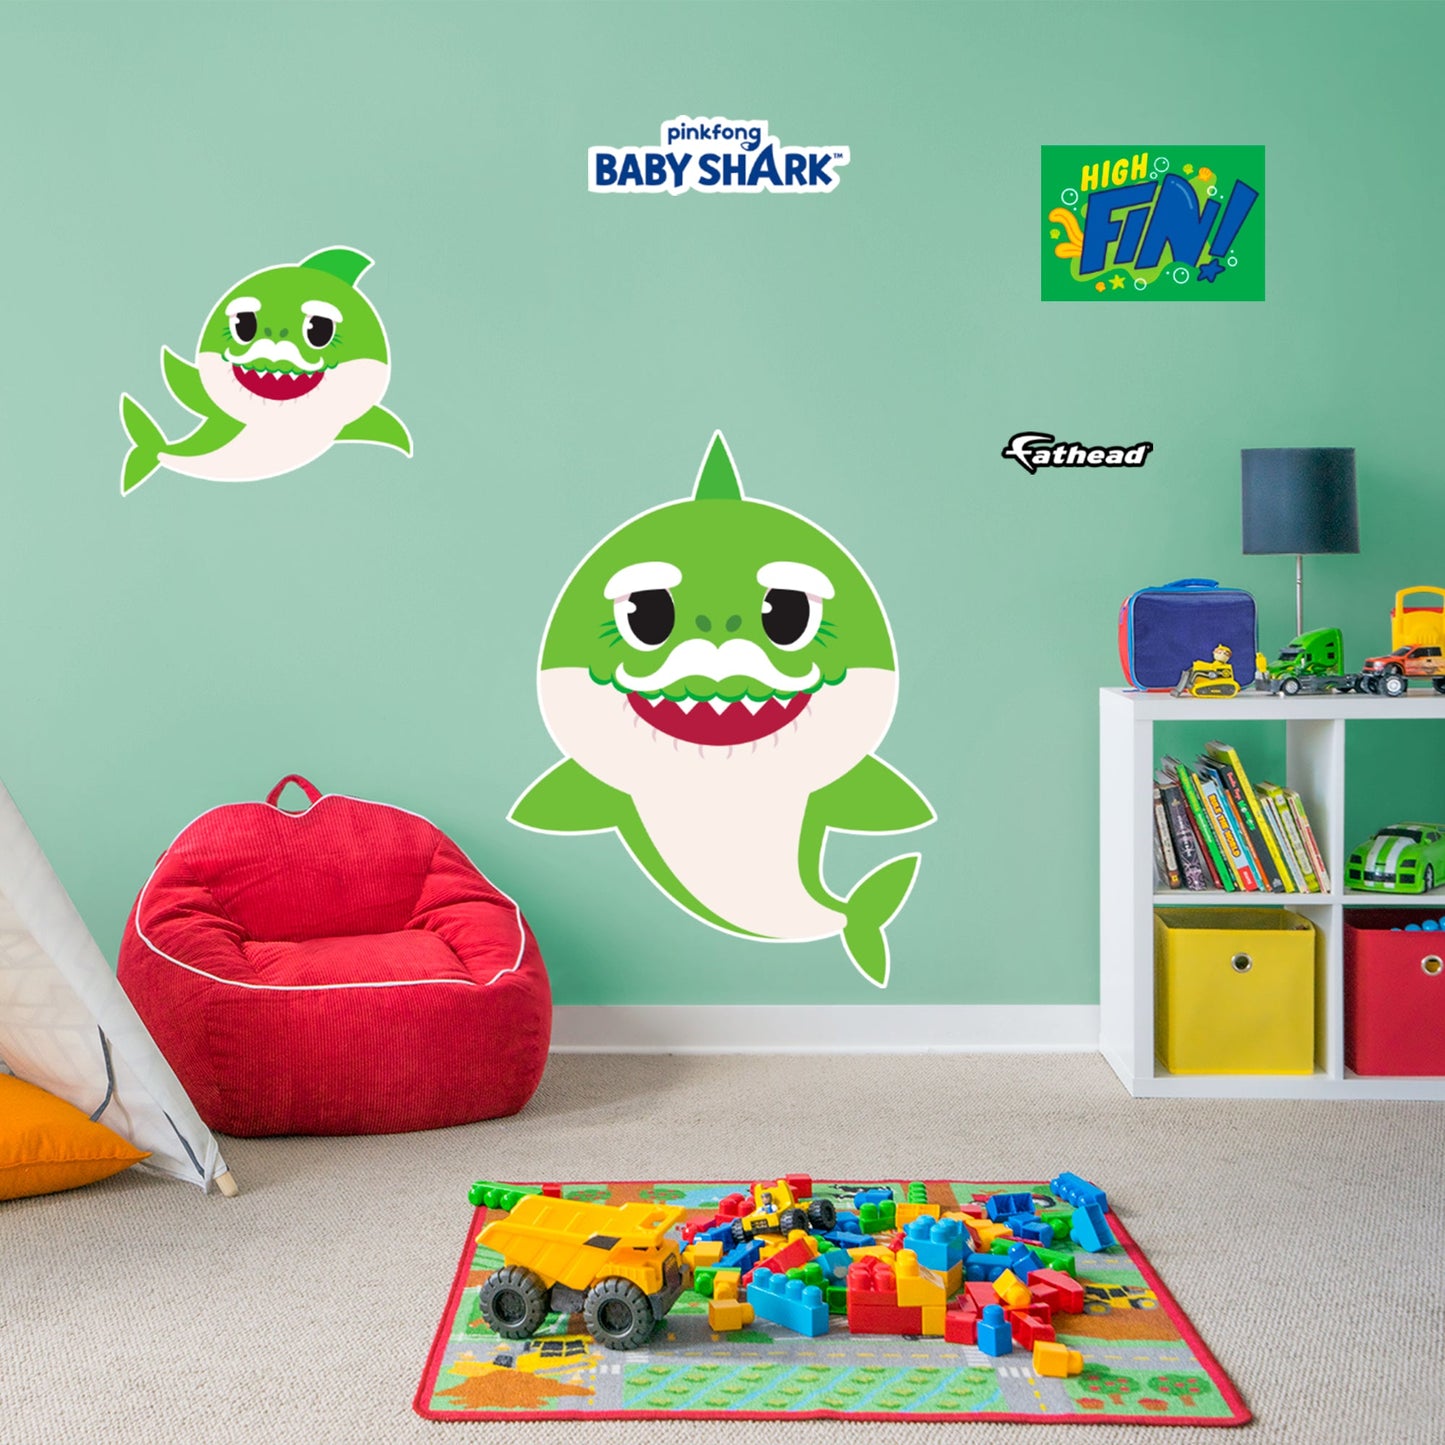 Baby Shark: Grandpa Shark RealBig - Officially Licensed Nickelodeon Removable Adhesive Decal